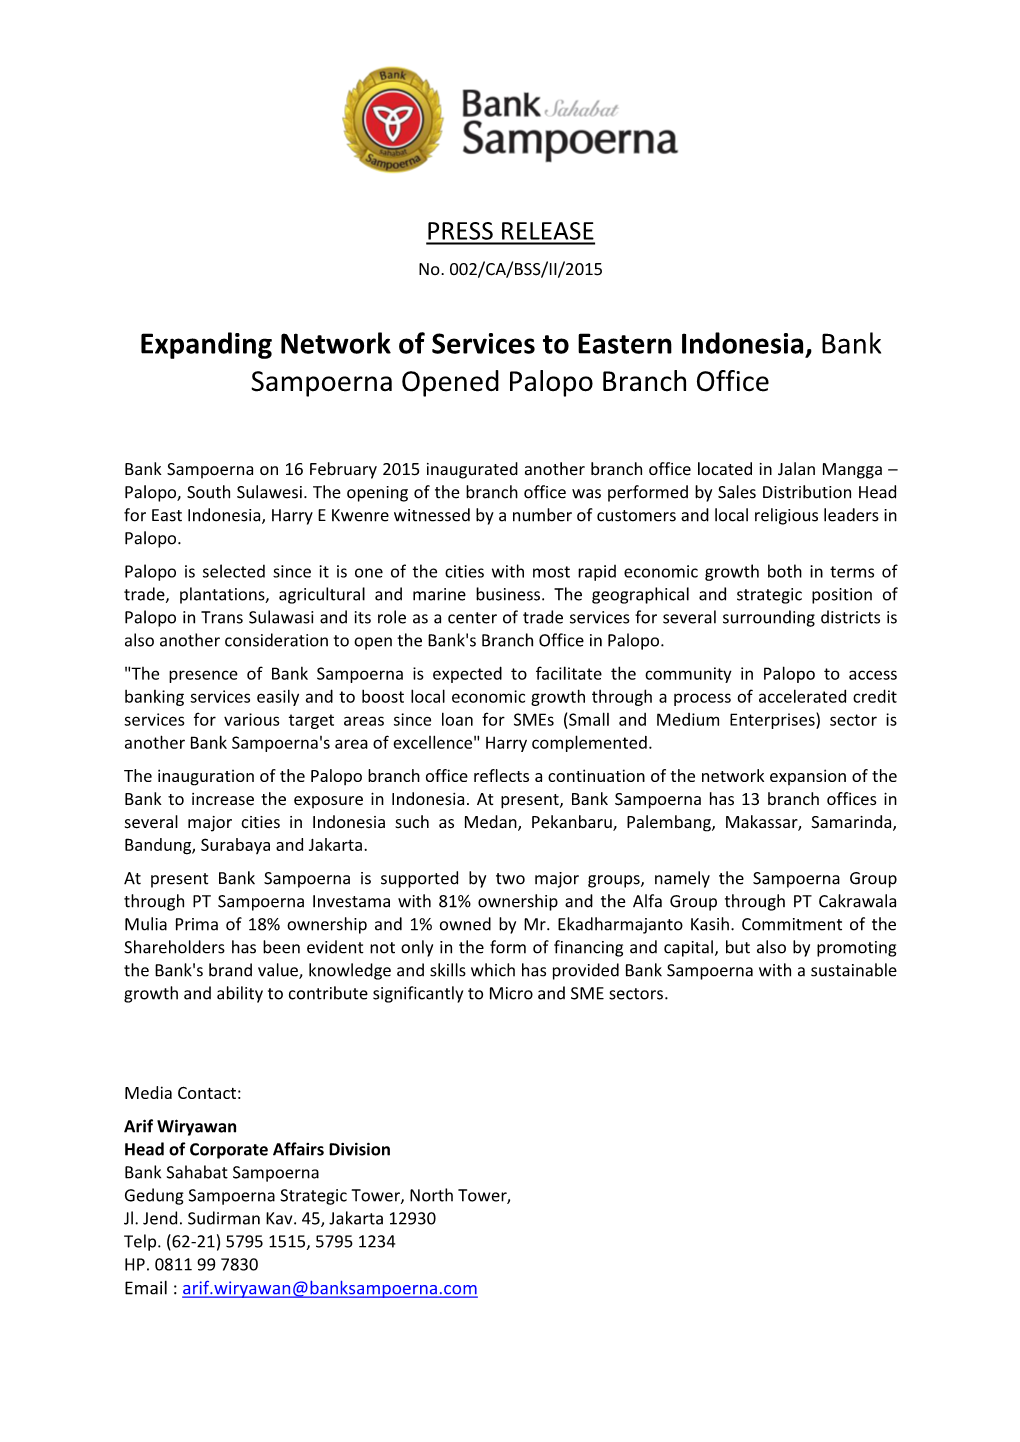 Expanding Network of Services to Eastern Indonesia, Bank Sampoerna Opened Palopo Branch Office